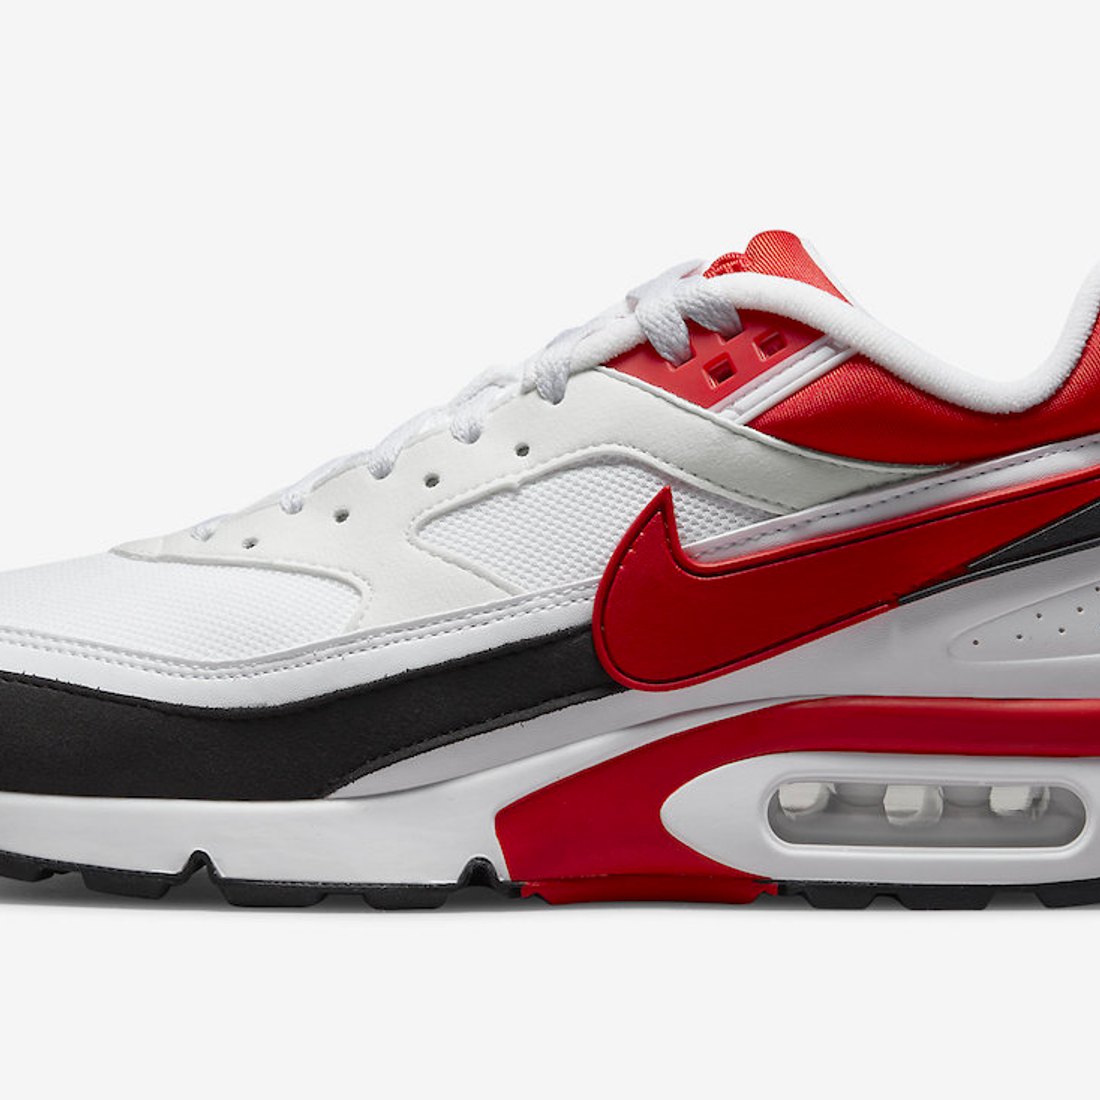 Afrika Glimp Ambacht The Nike Air Max BW 'Sport Red' is Hot-Blooded - Sneaker Freaker